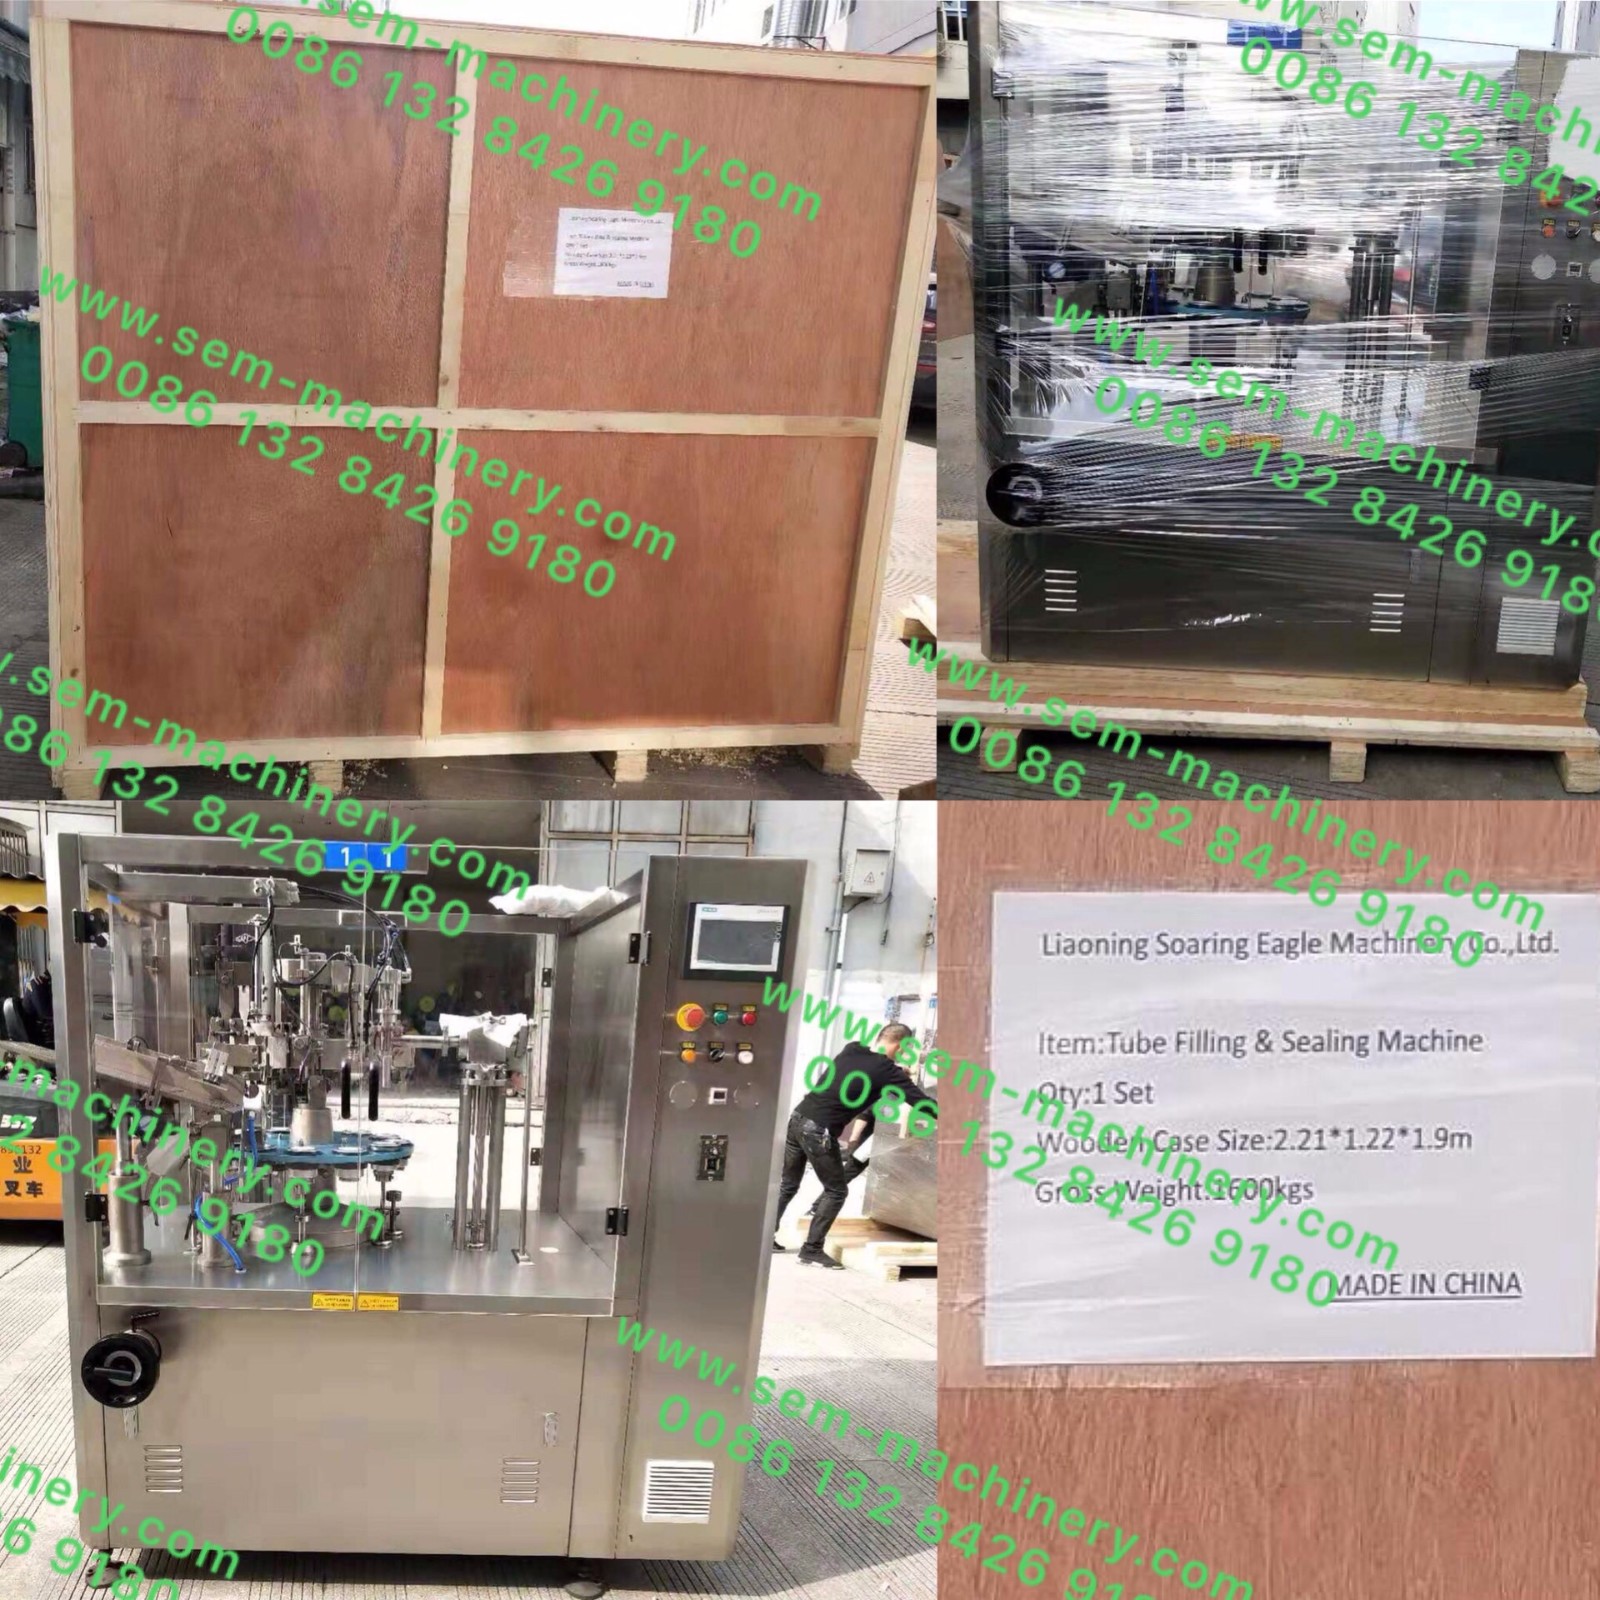 Liquid filling and carton box packing line machines delivered